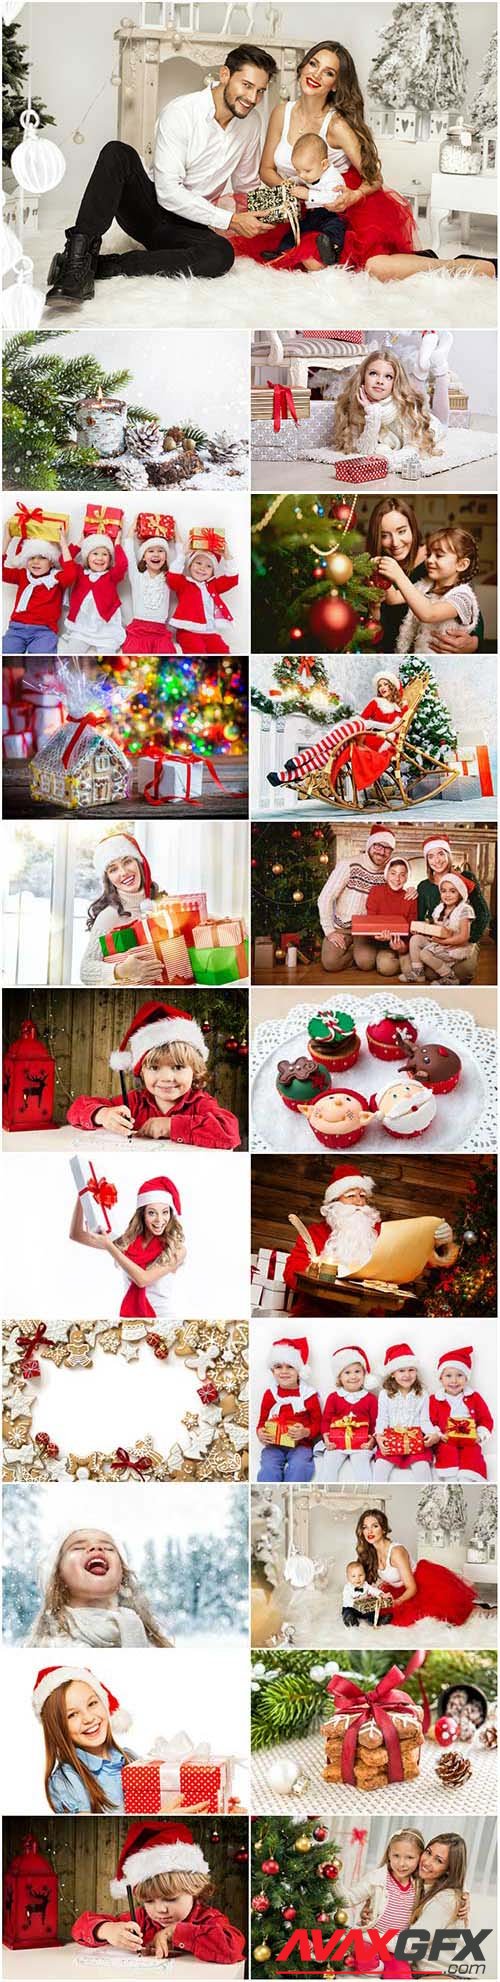 New Year and Christmas stock photos 92